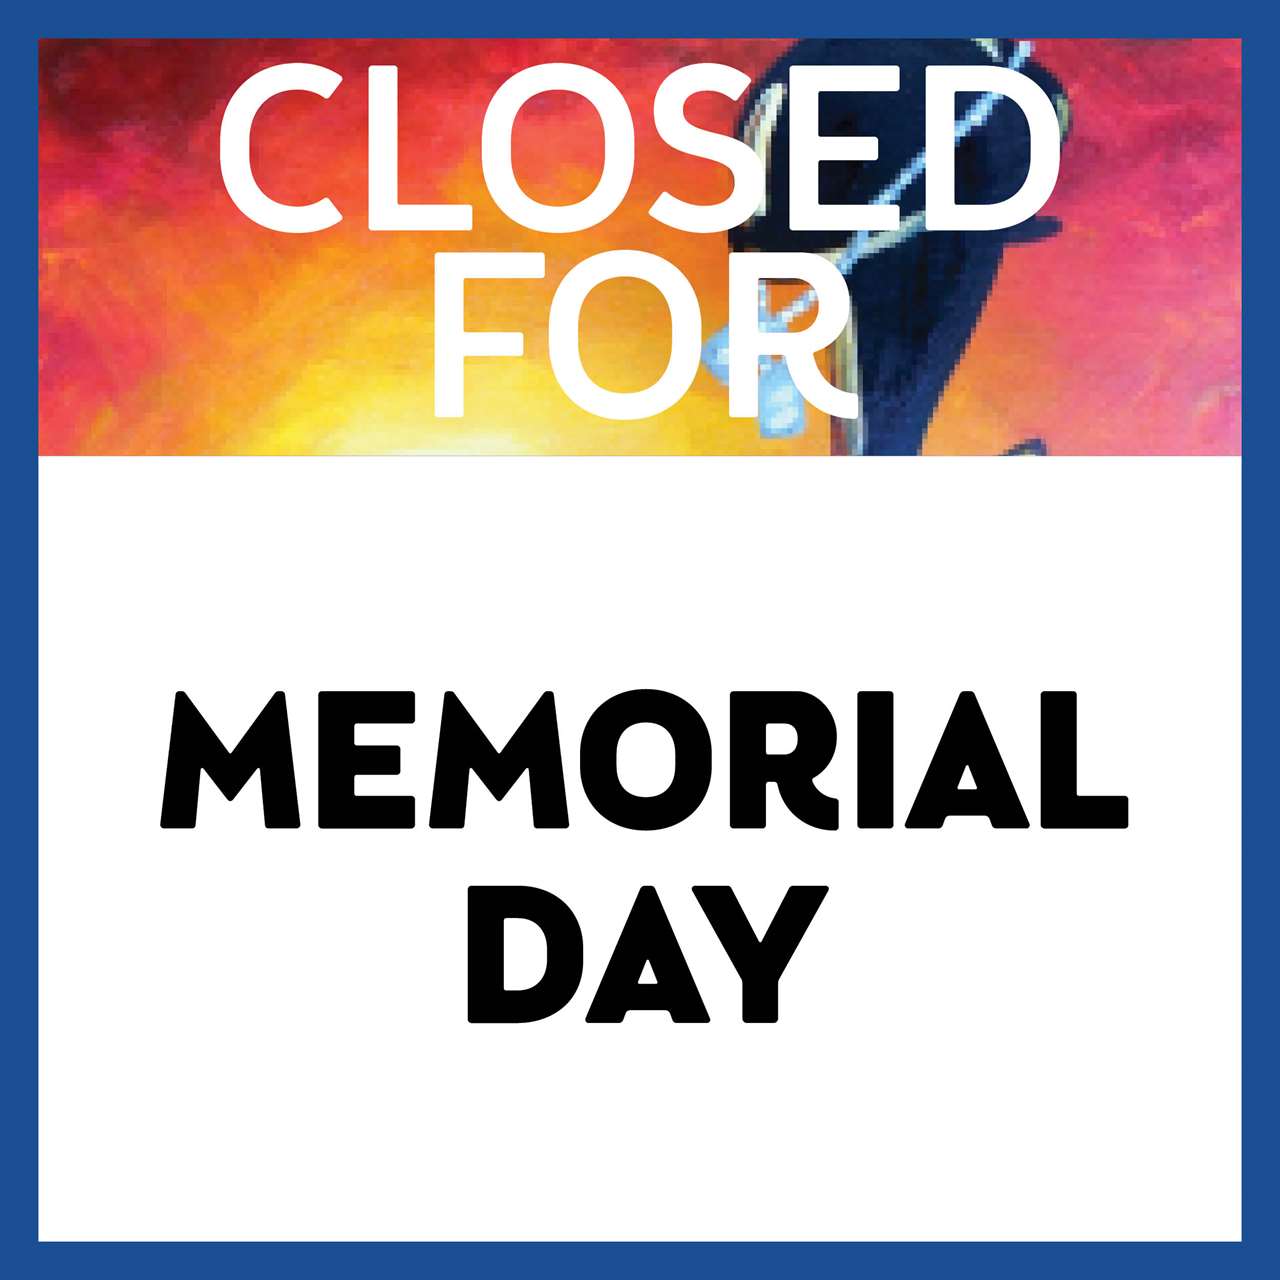 closed-for-memorial-day-mon-may-28-12am-at-buffalo-amherst